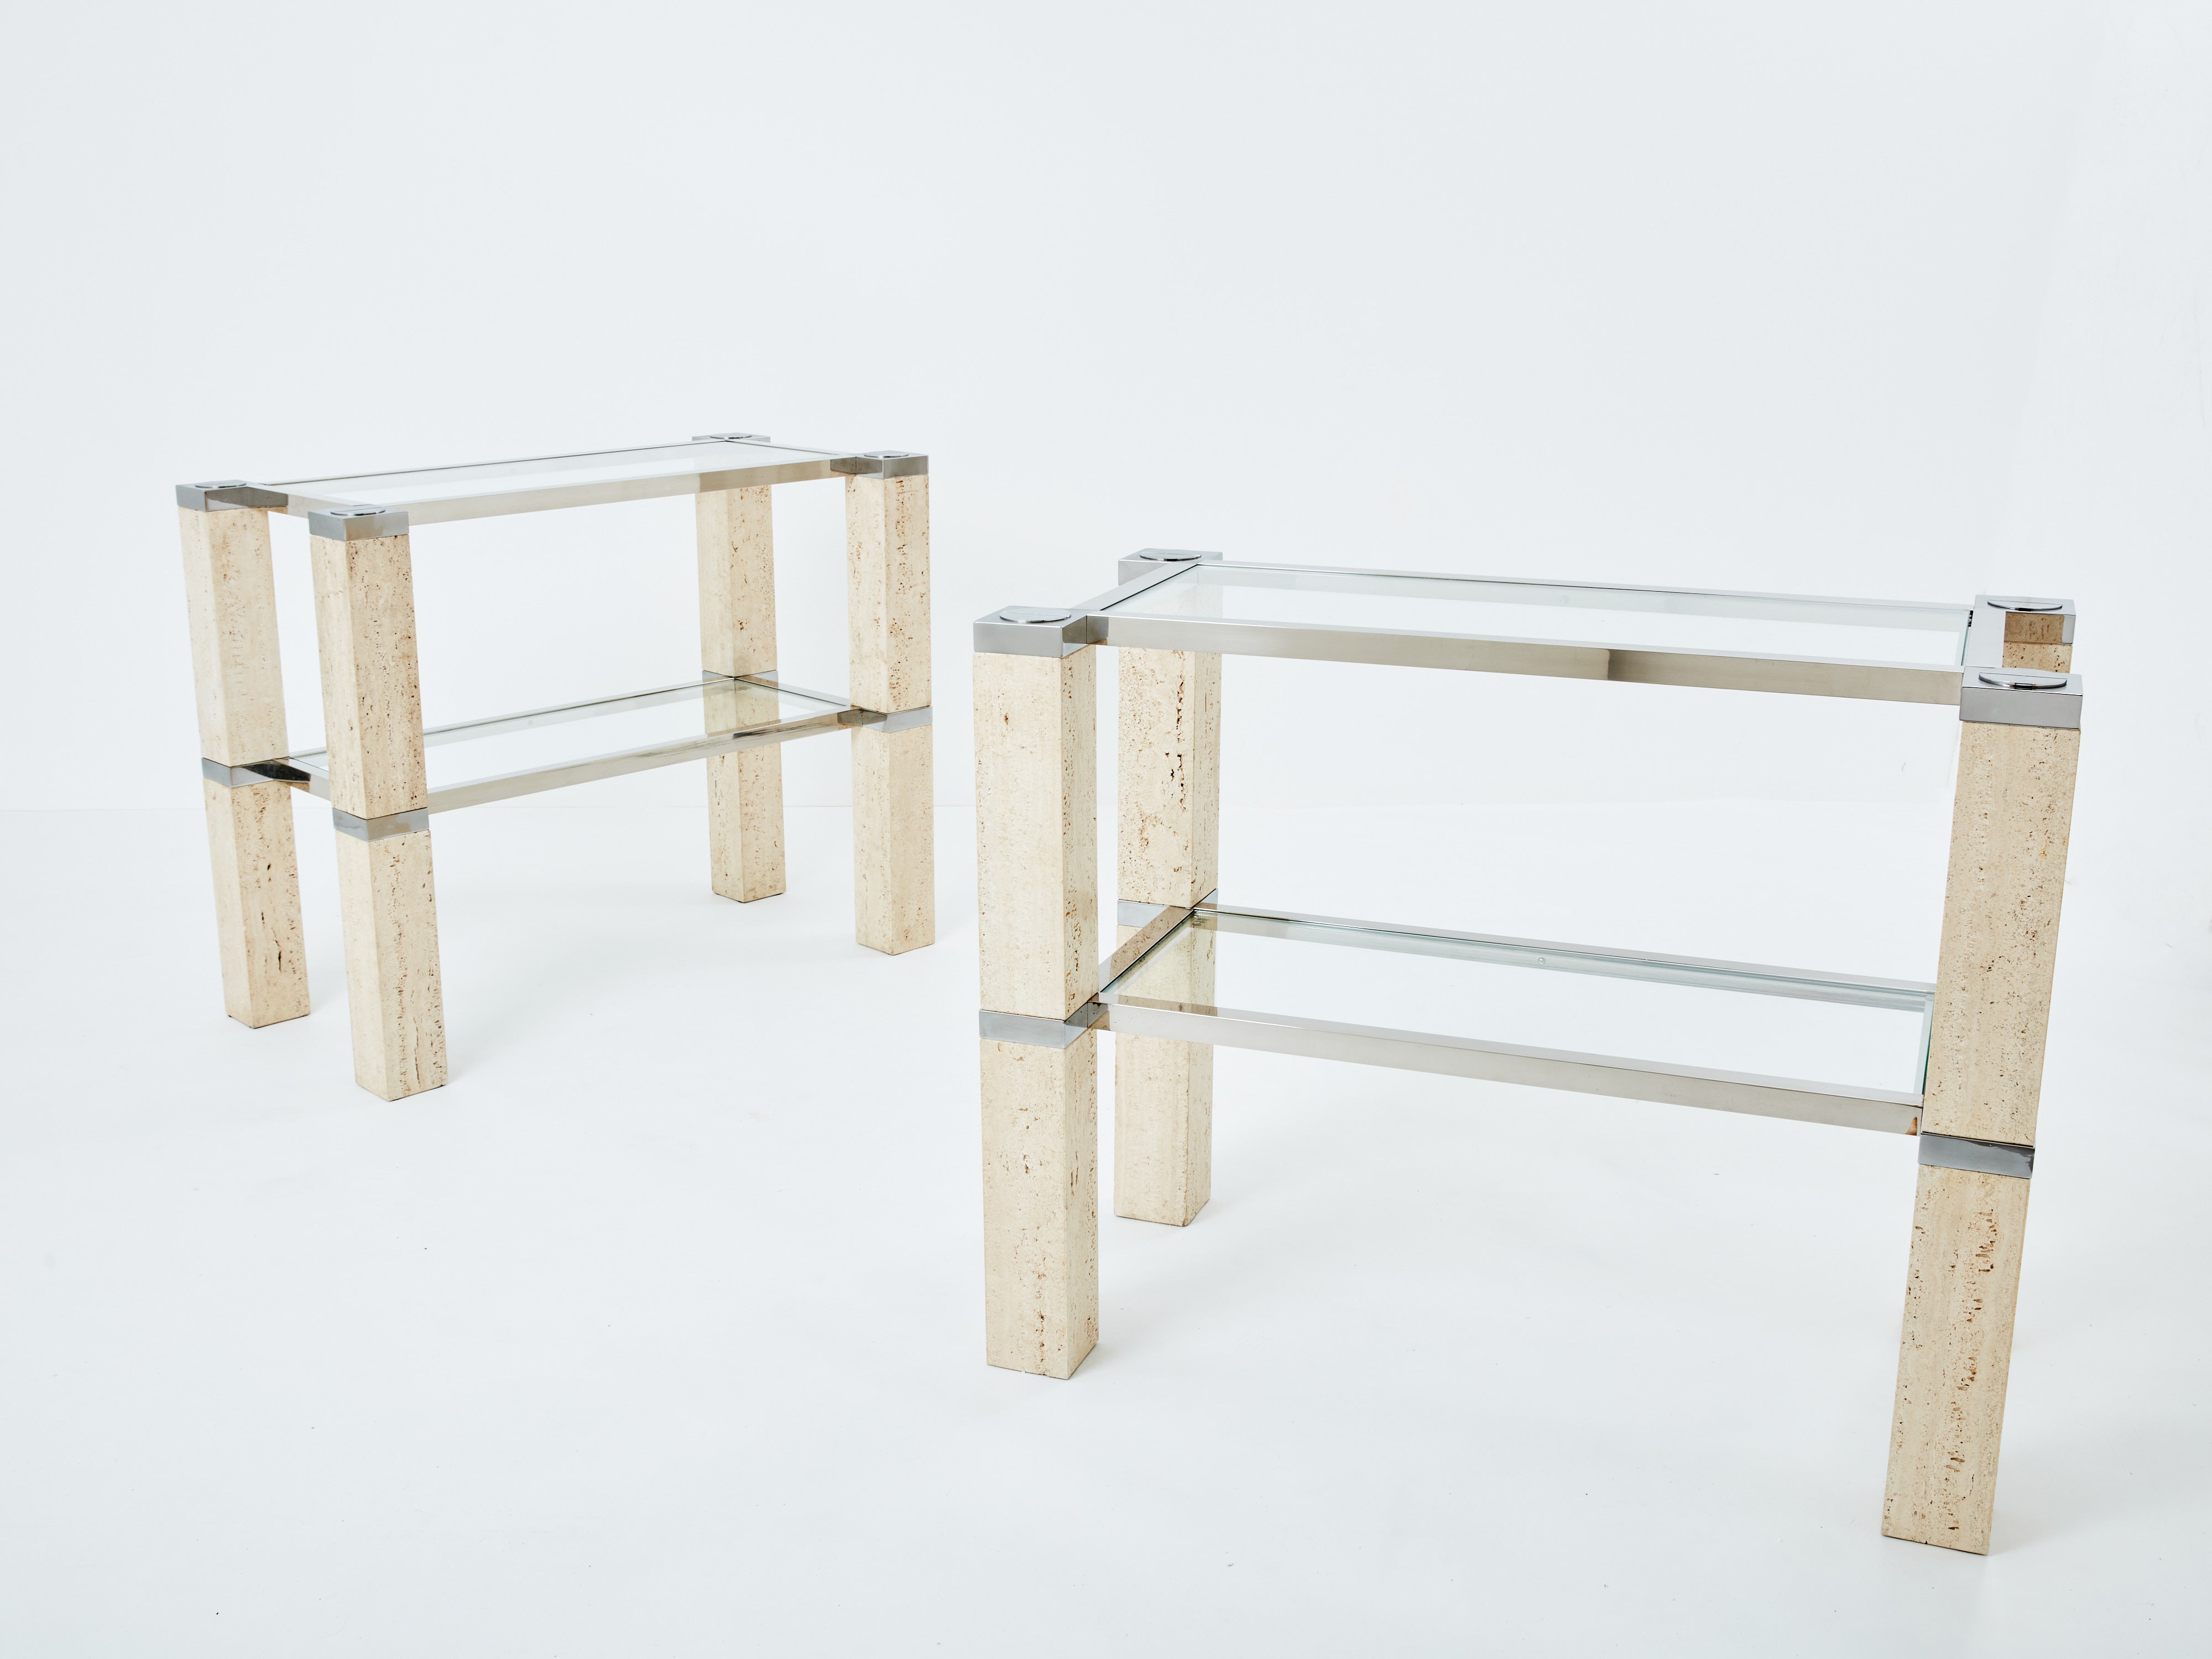 Pair of François Catroux chrome and travertine console tables 1973